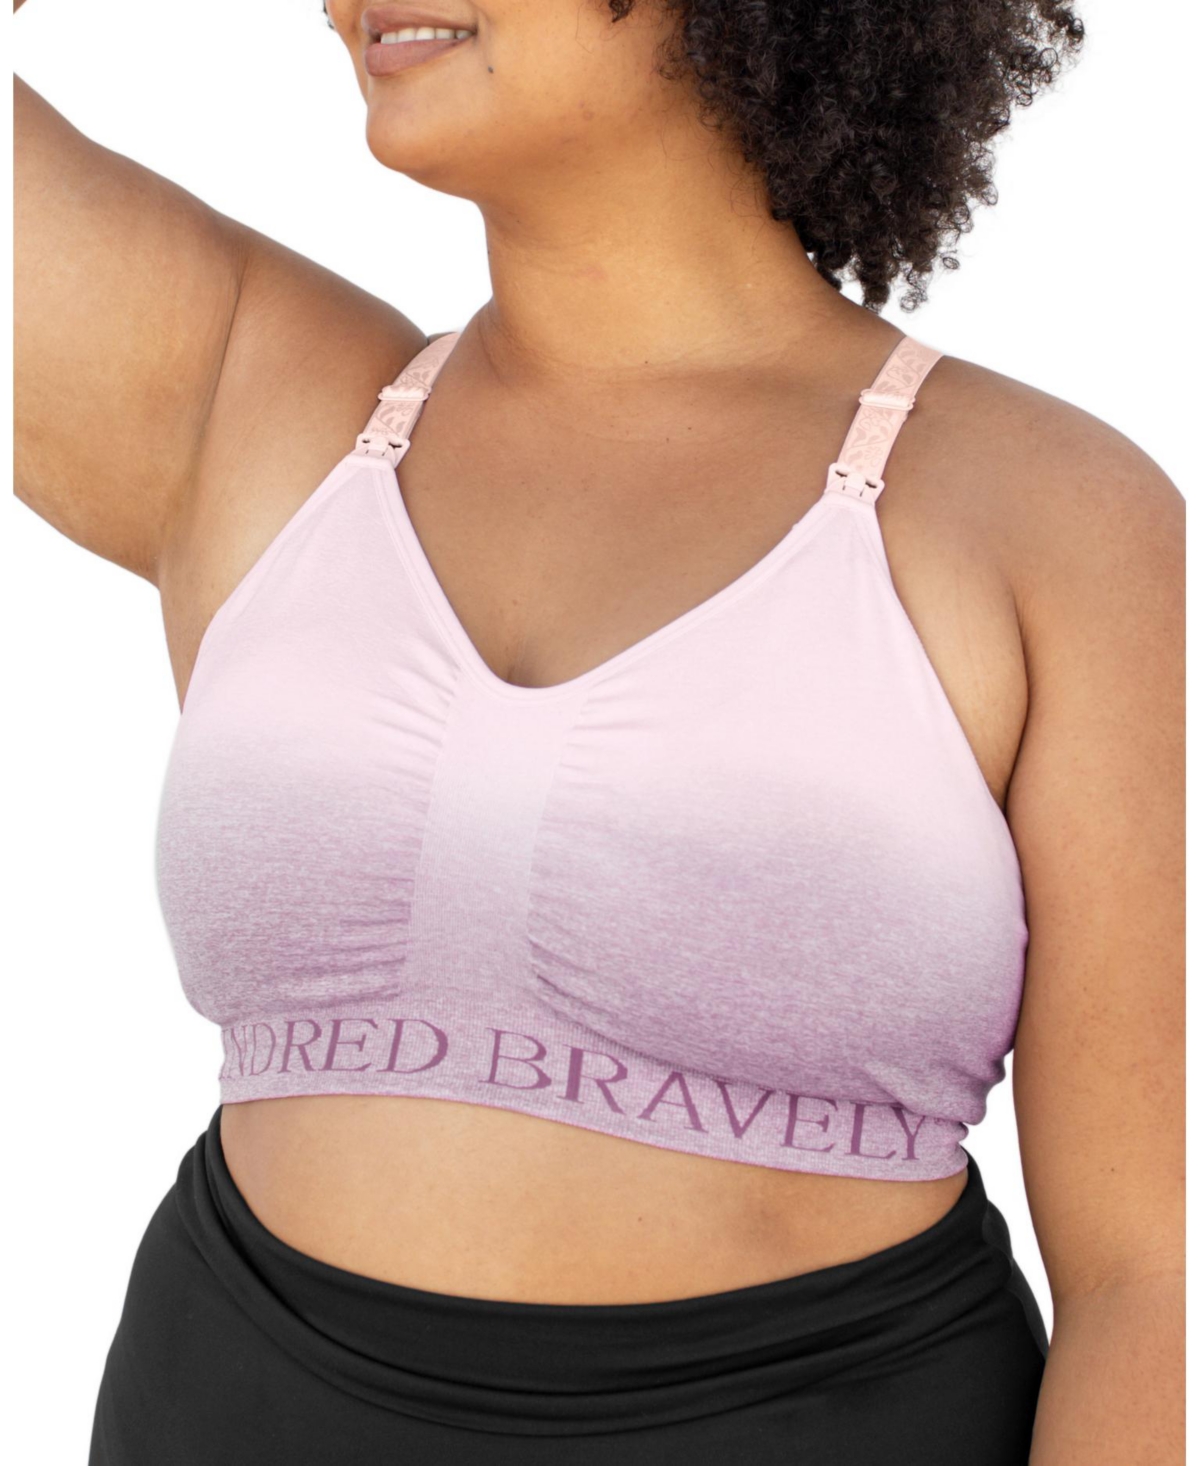 Kindred Bravely Plus Size Busty Sublime Hands-Free Pumping & Nursing Sports  Bra s - Fits s 42E-46I - Ombre Purple